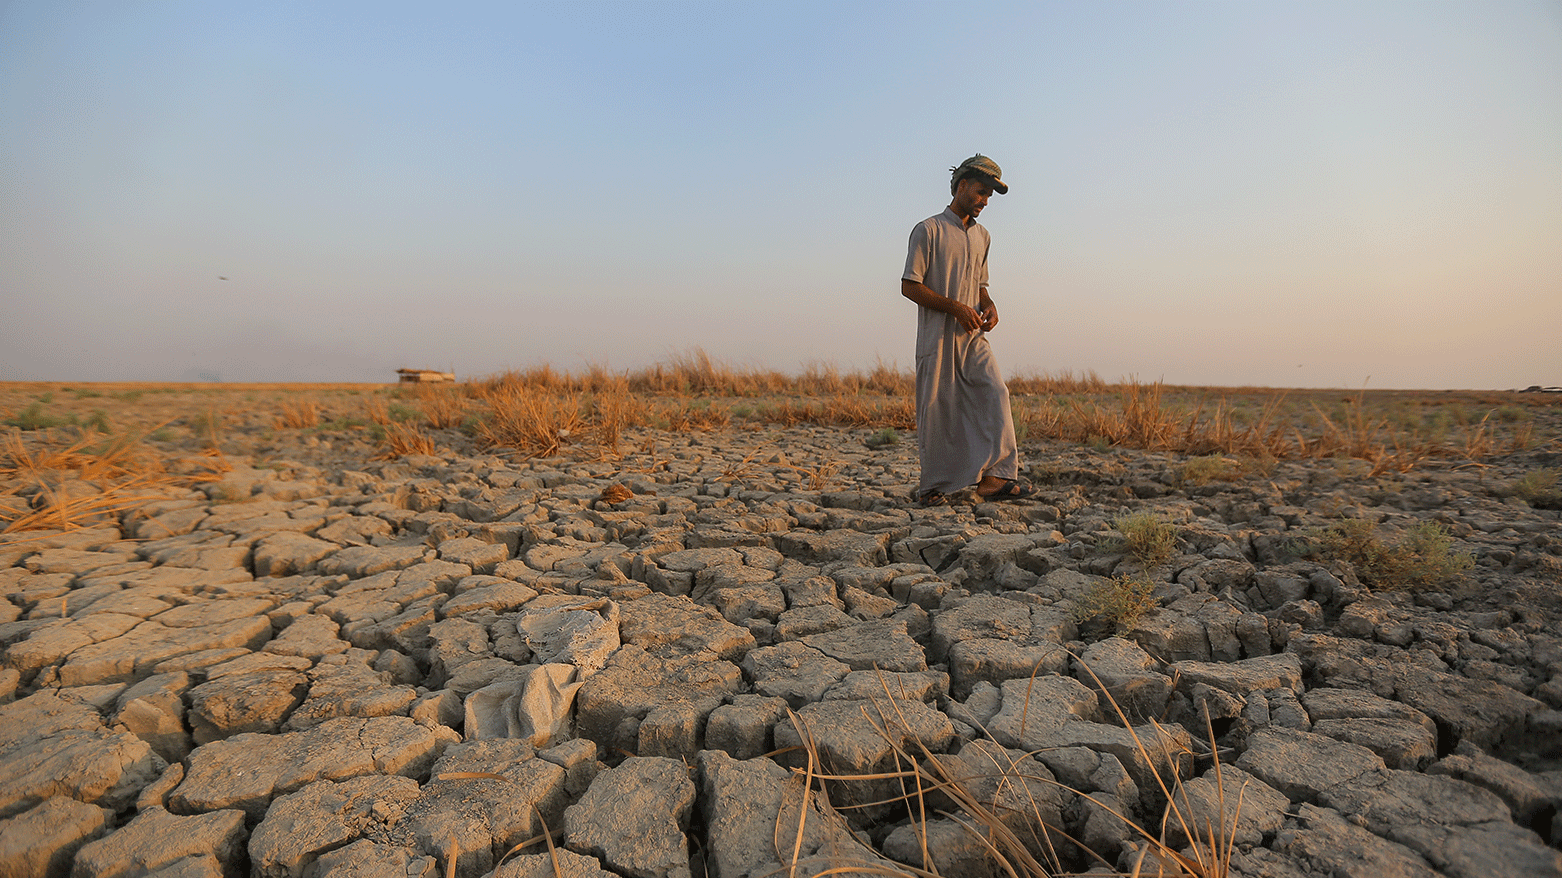 A fisherman walks across a dry patch of land in the marshes in Dhi Qar province, Iraq, Sept. 2, 2022. (Photo: Anmar Khalil/ AP)